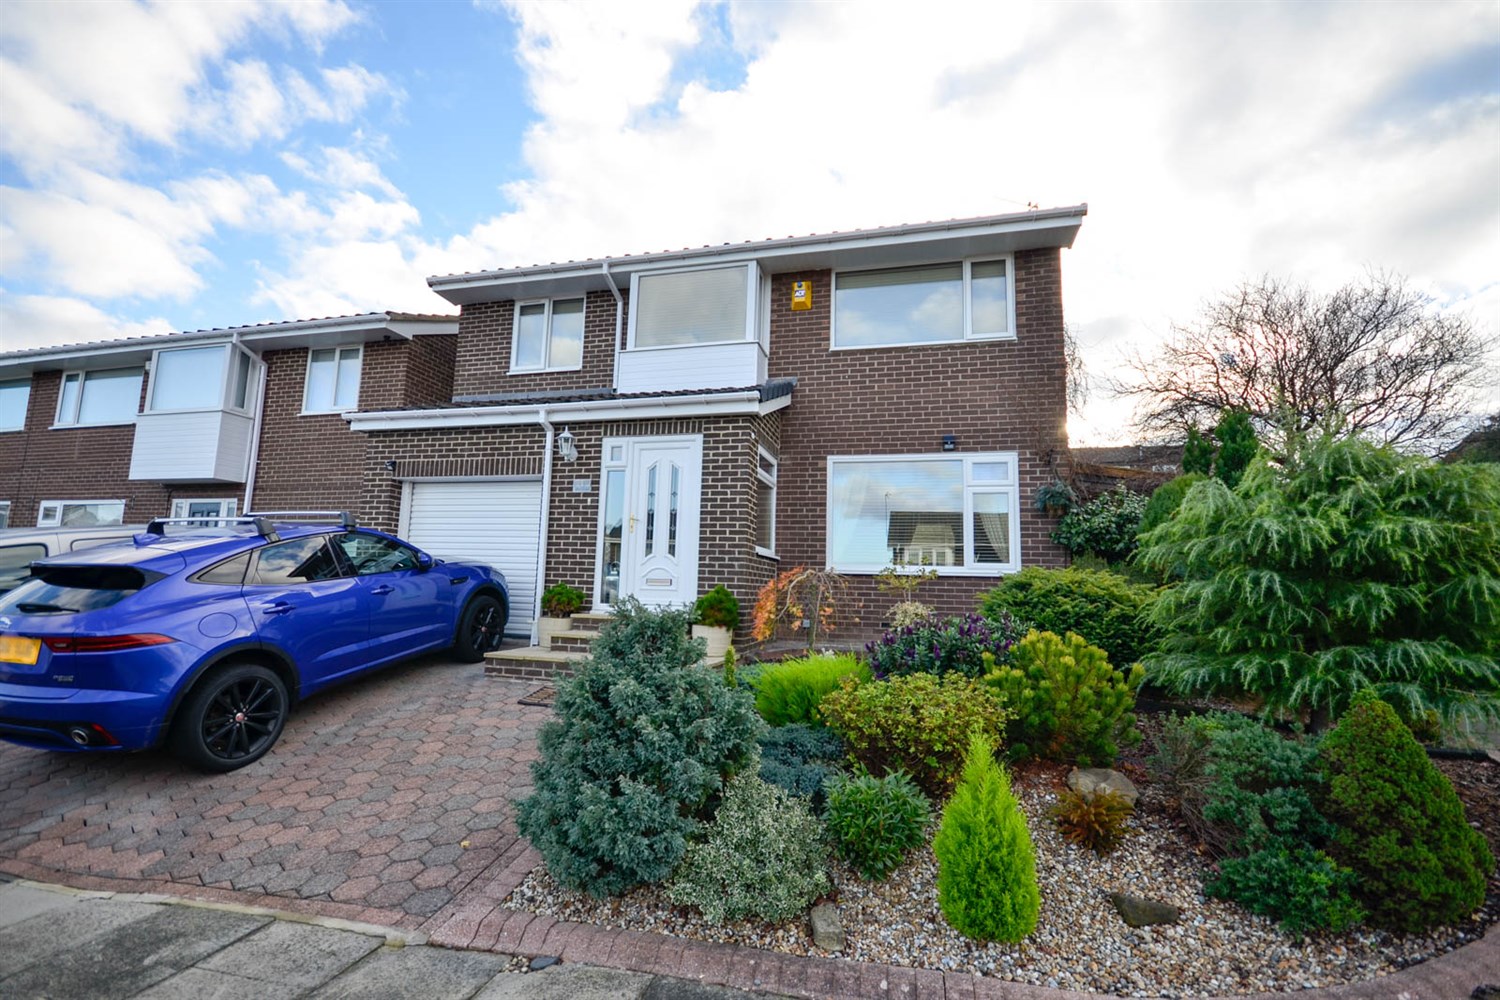 4 bed detached house for sale in L'Arbre Crescent, Whickham - Property Image 1